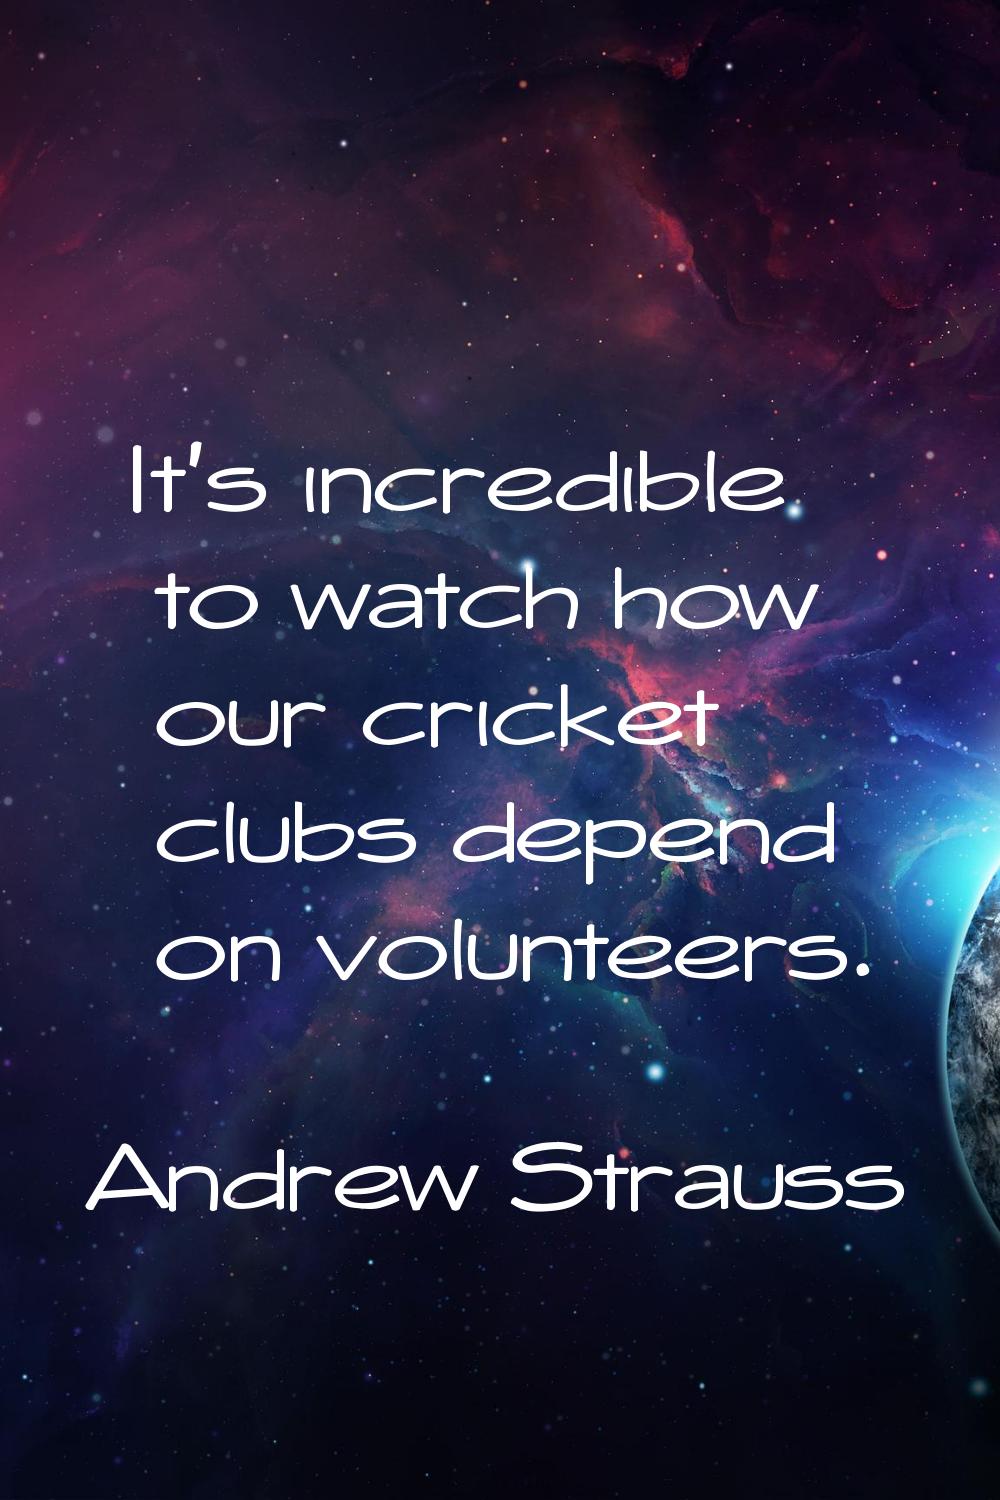 It's incredible to watch how our cricket clubs depend on volunteers.